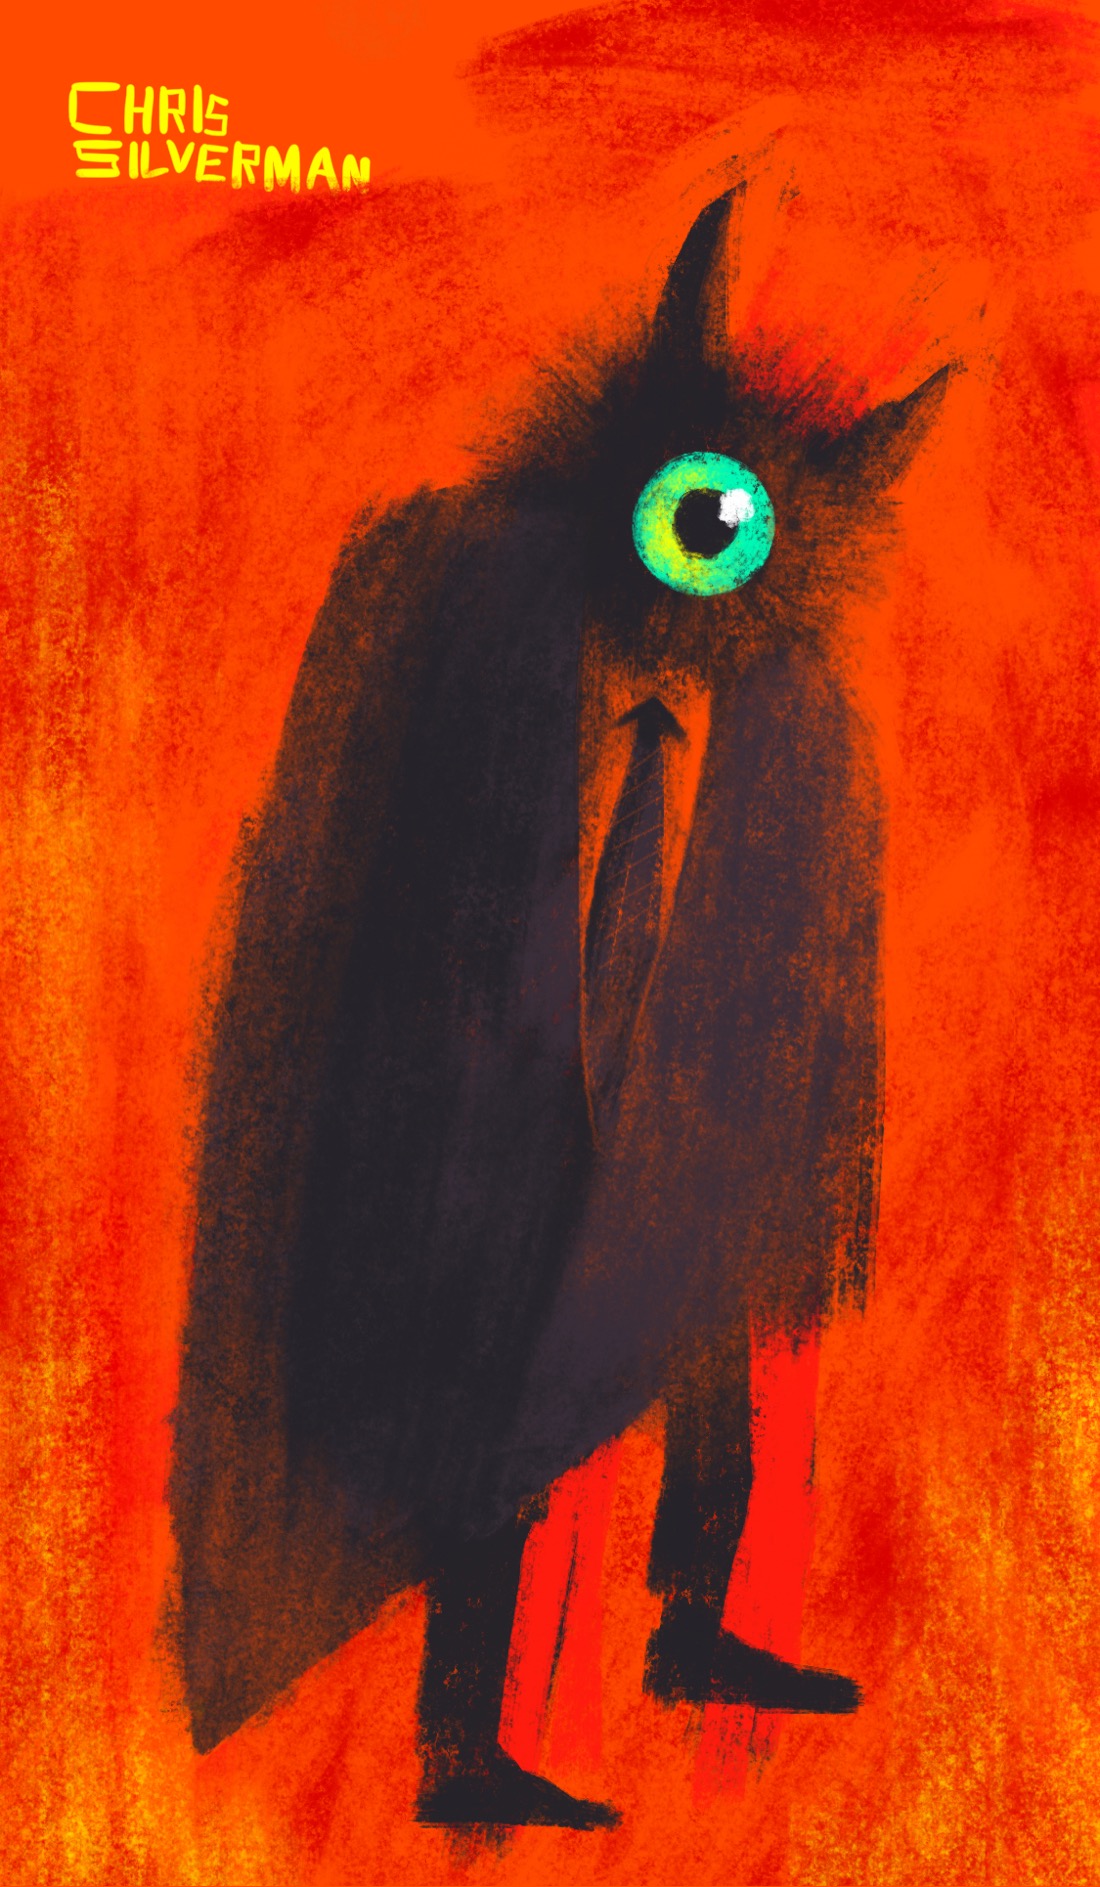 A flaming red-orange background. Standing in the foreground is a monstrous dark figure, wearing a trenchcoat, a tie, and formal shoes. The figure has no arms, and its entire head is taken up by one giant iridescent green eye. Its head is bristling with fur and two large ears or horns.